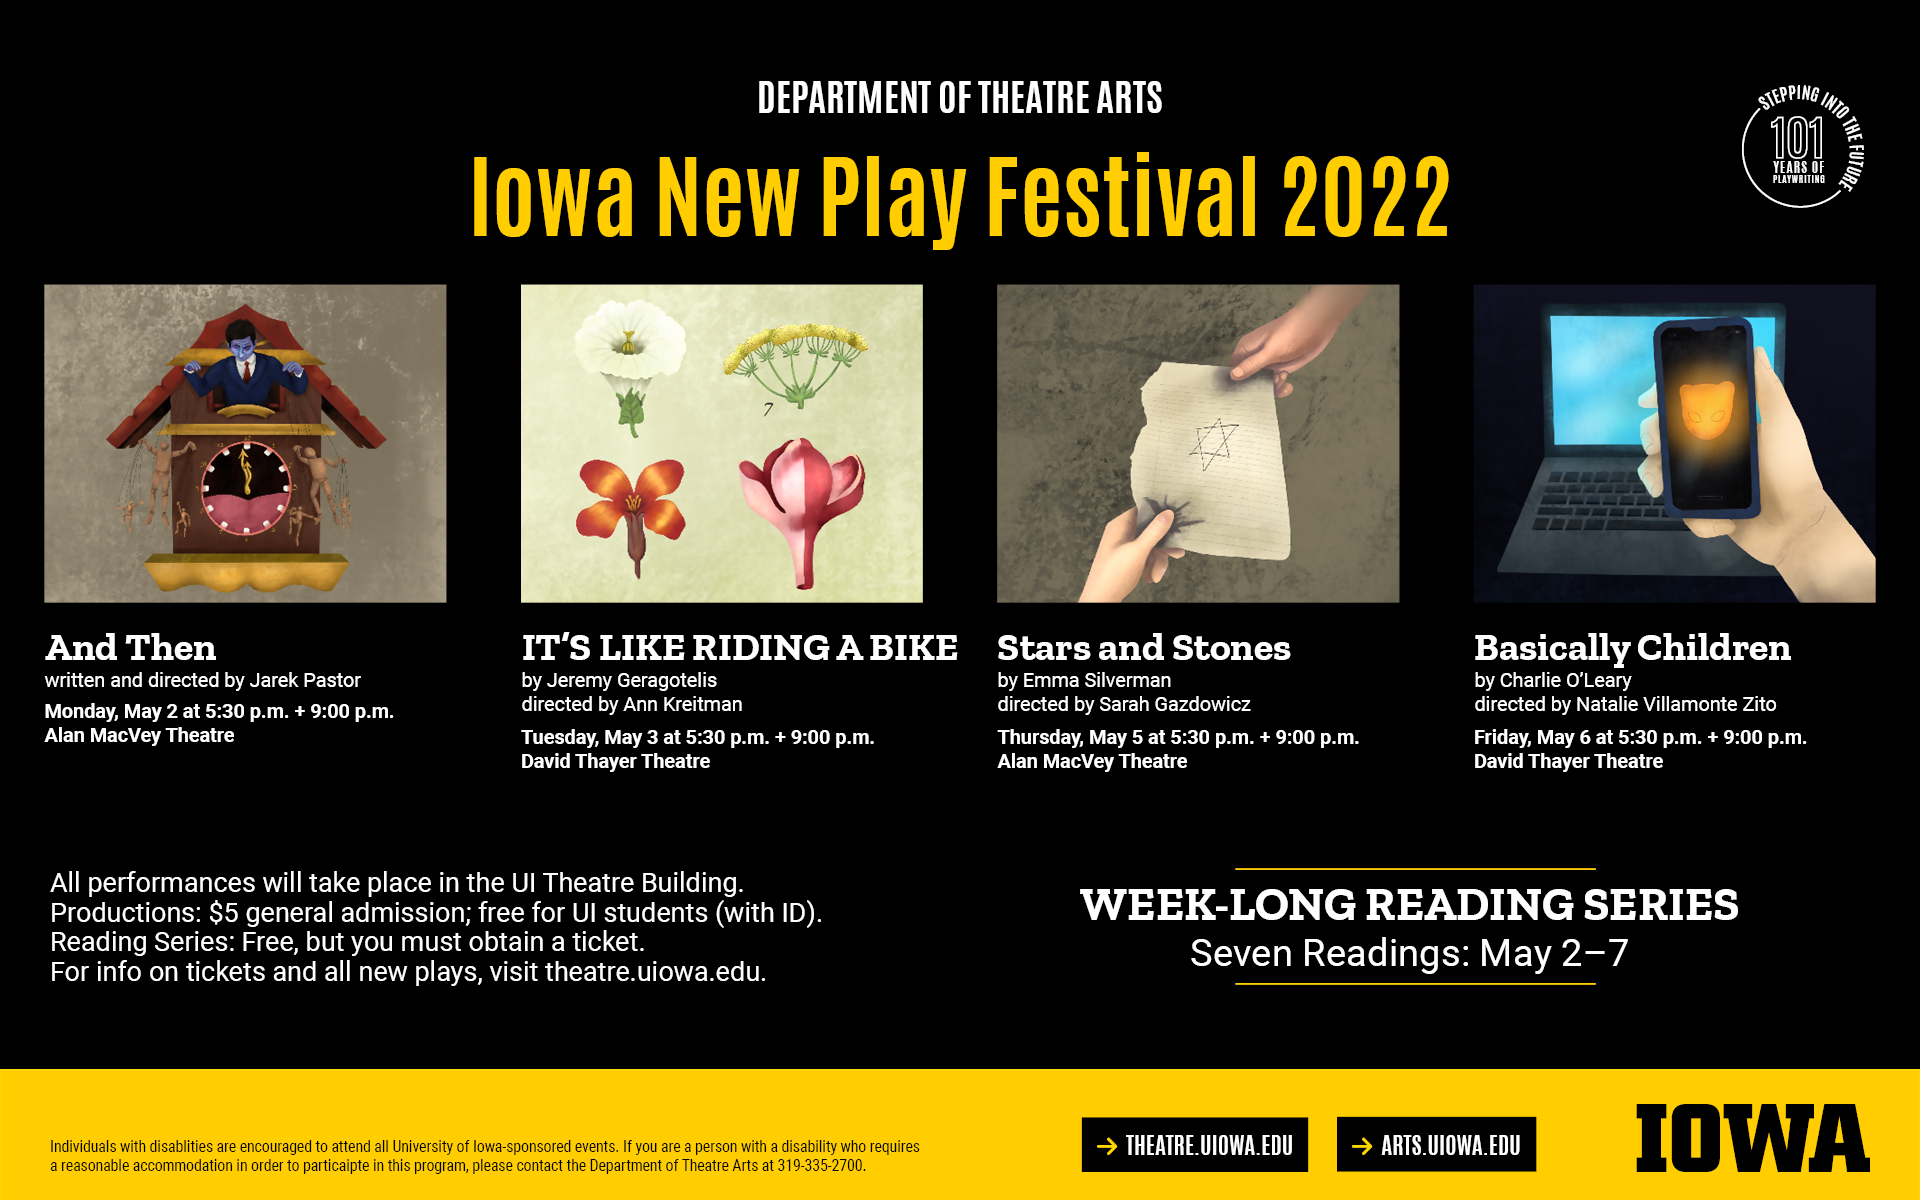 Iowa New Play Festival 2022. And Then by Jarek Pastor. Monday, May 2 at 5:30 and 9pm, MacVey. IT'S LIKE RIDNG A BIKE by Jeremy Geragotelis. May 3 at 5:30 and 9pm, Thayer. Stars and Stones by Emma Silveramn. May 5 at 5:30 and 9pm, MacVey. Basically Children by Charlie O'Leary. May 6 at 5:30 and 9pm, Thayer. Weeklong reading searies, May 2-7. Visit theatre.uiowa.edu for more info and ticketing details.